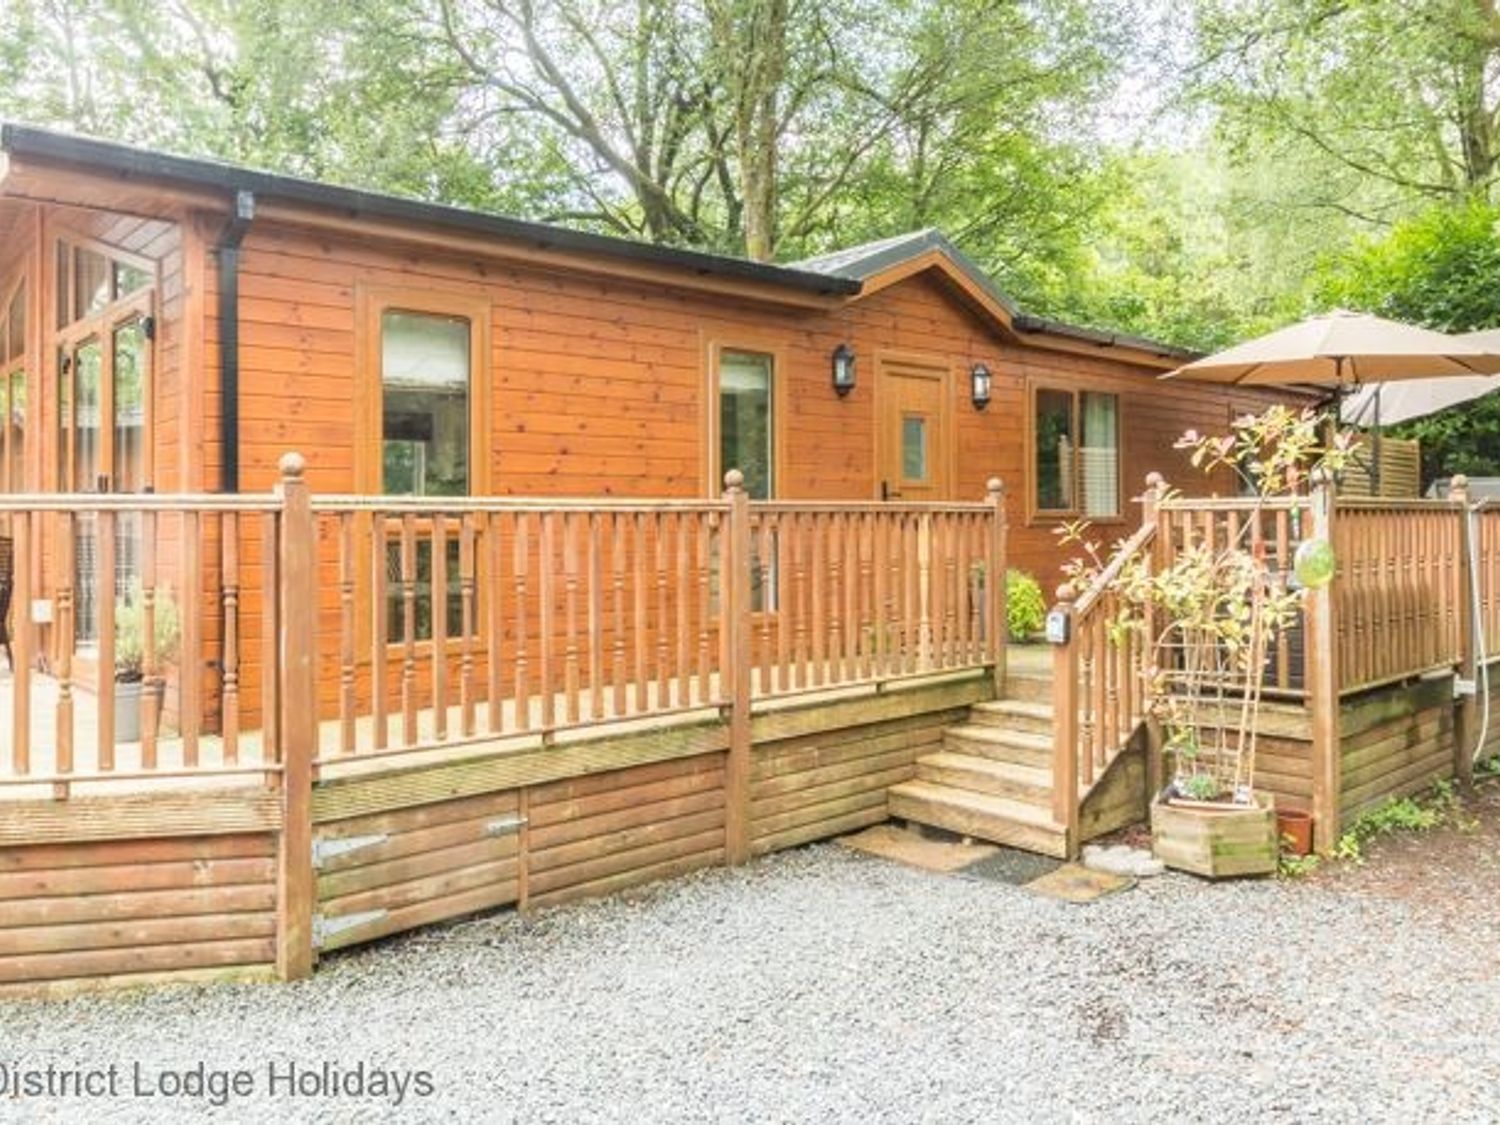 Laughing Duck Lodge, Windermere